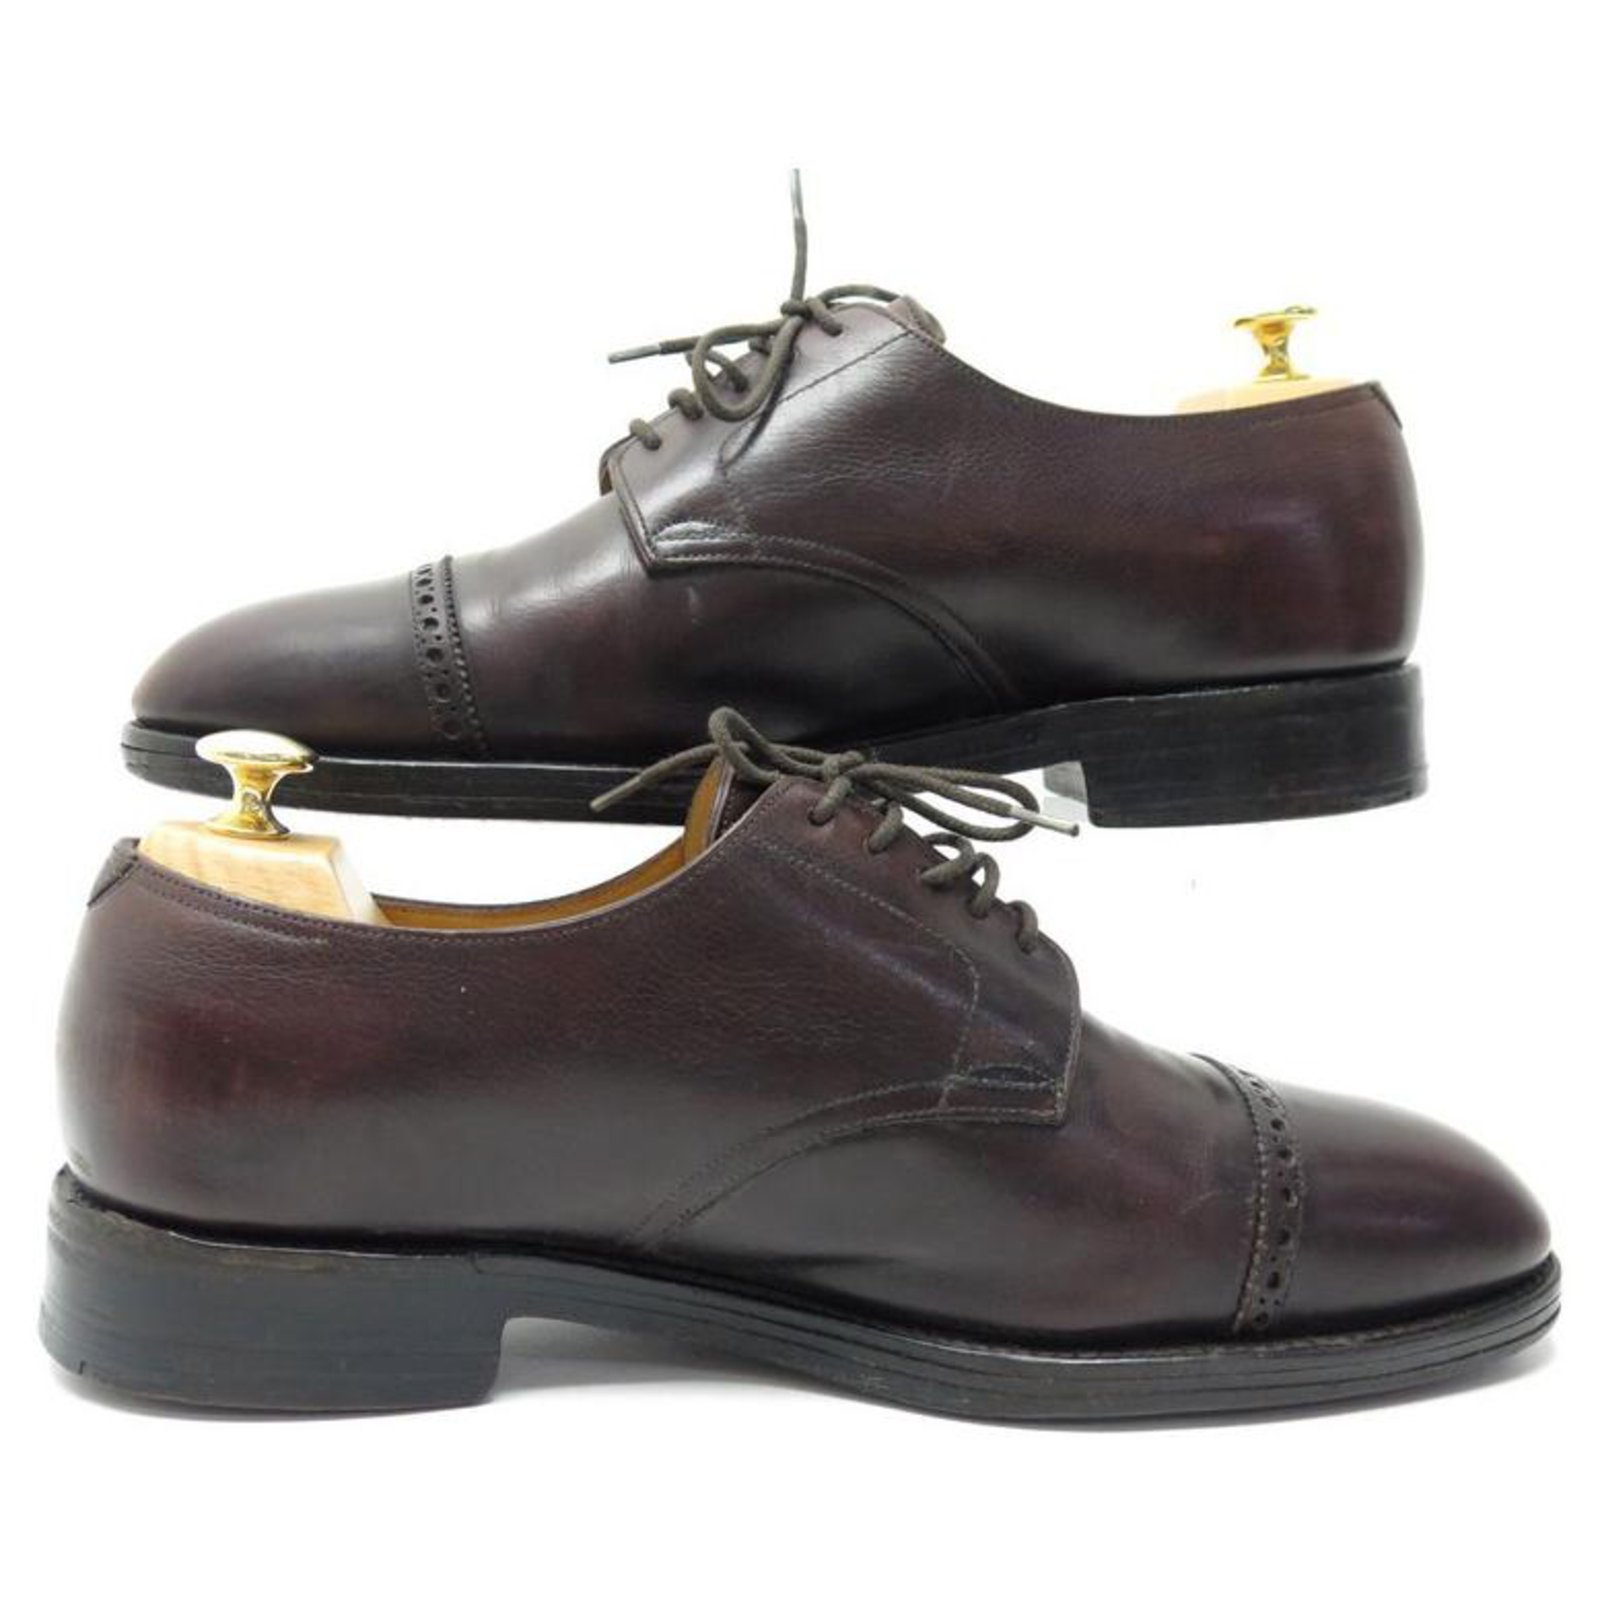 JOHN LOBB RUSSEL SHOES 8E 42 BROWN LEATHER DERBY + SHOES TAPER ref 